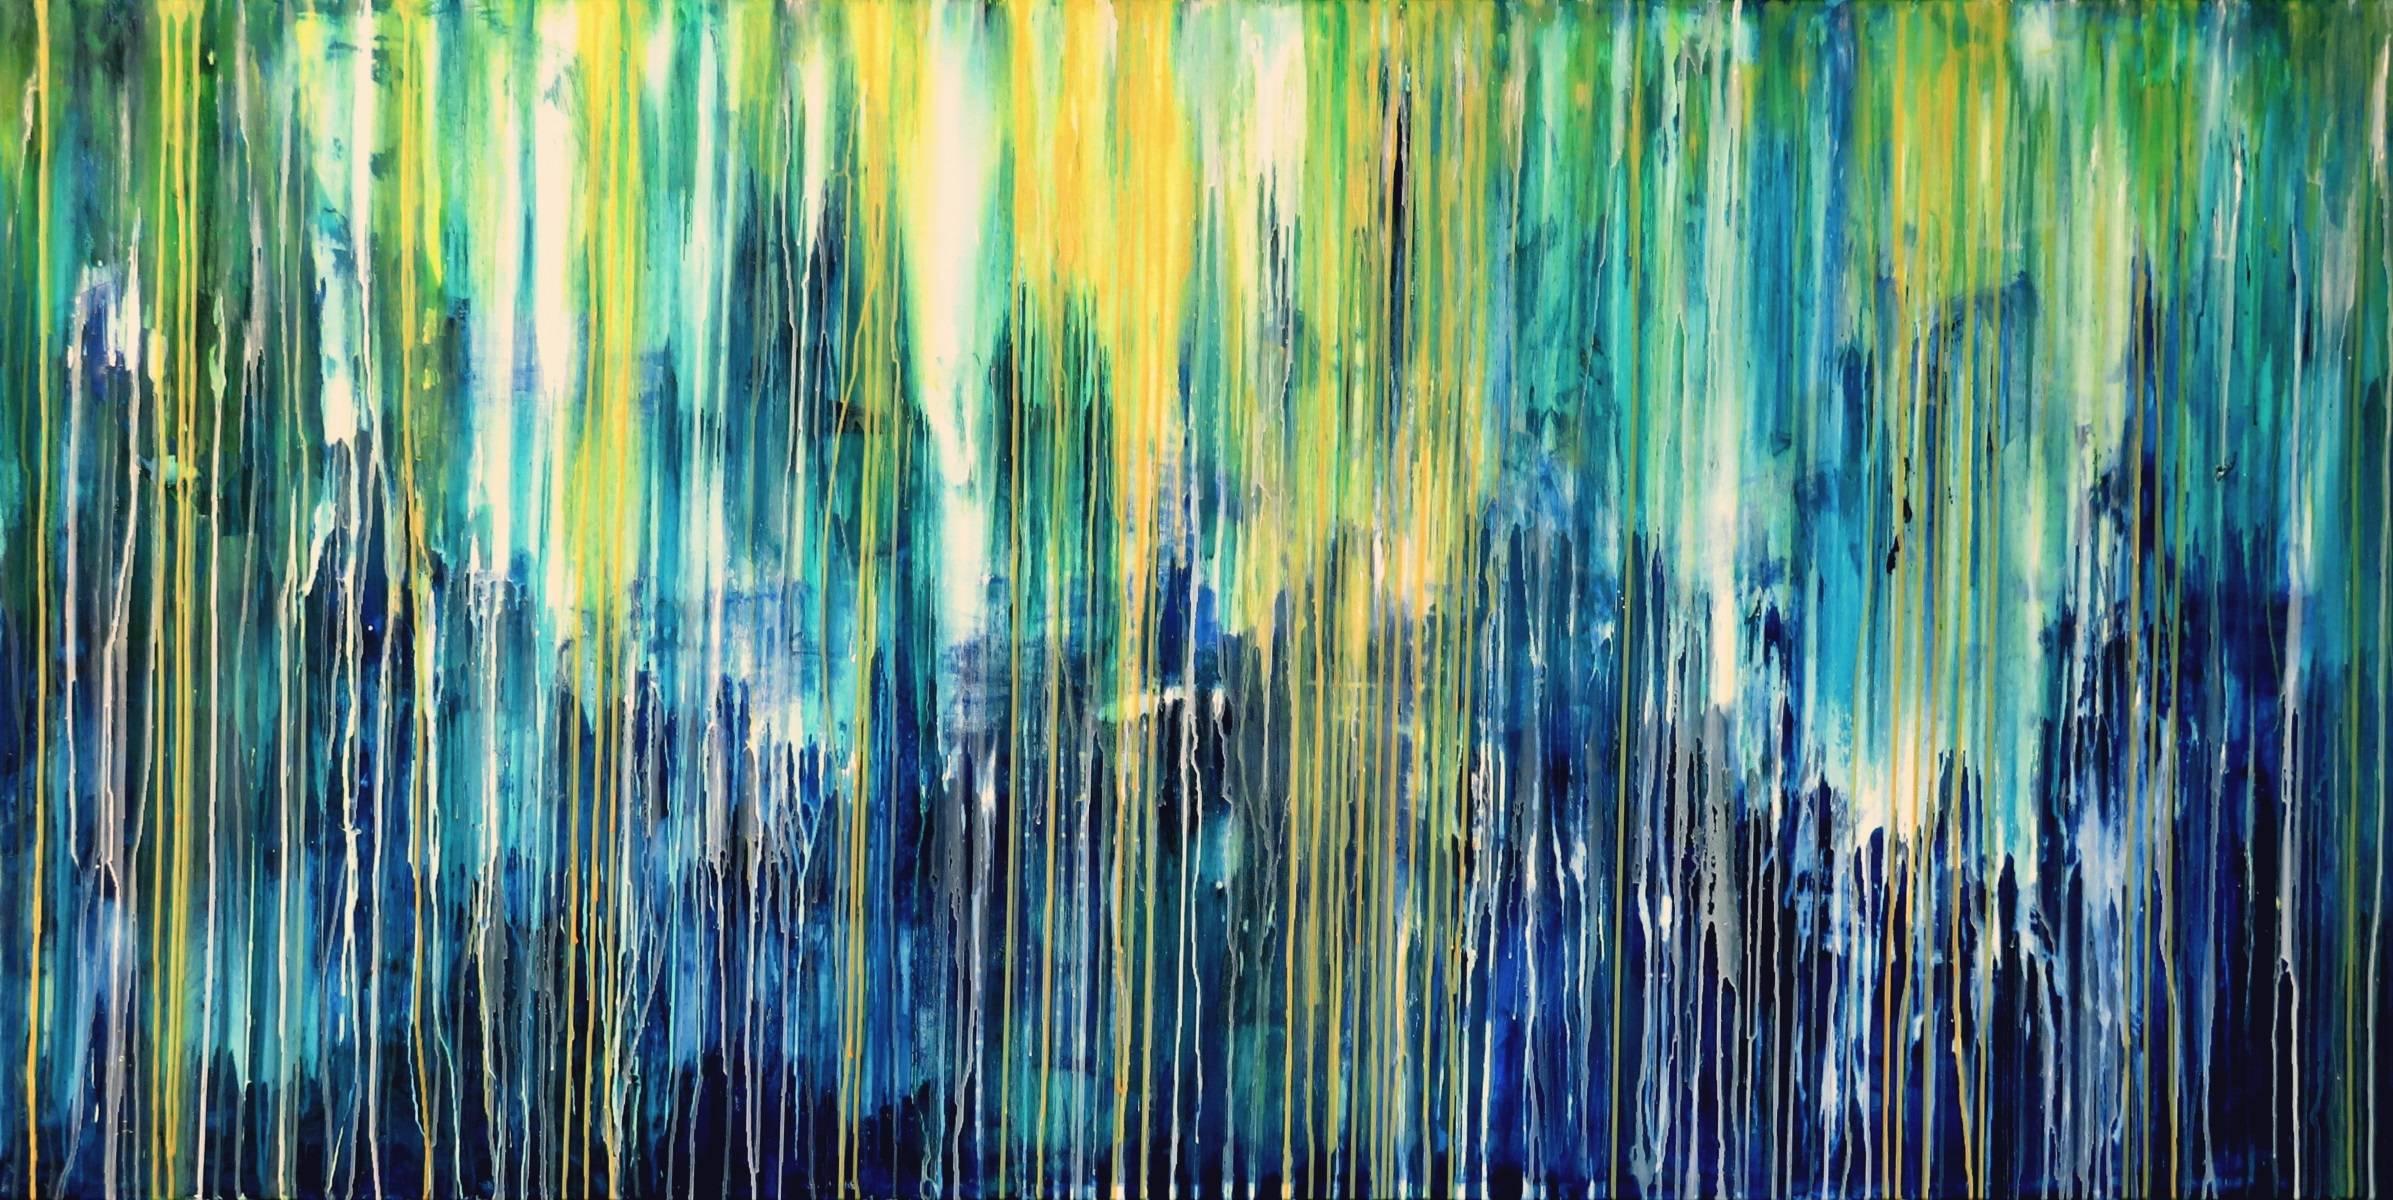 Abstract and contemporary painting by Portuguese artist, Carla Sá Fernandes. With vibrant, intense and explosive colors, this modern piece is perfect for any collection. A high quality acrylic painting which is done on gallery wrapped 100% cotton